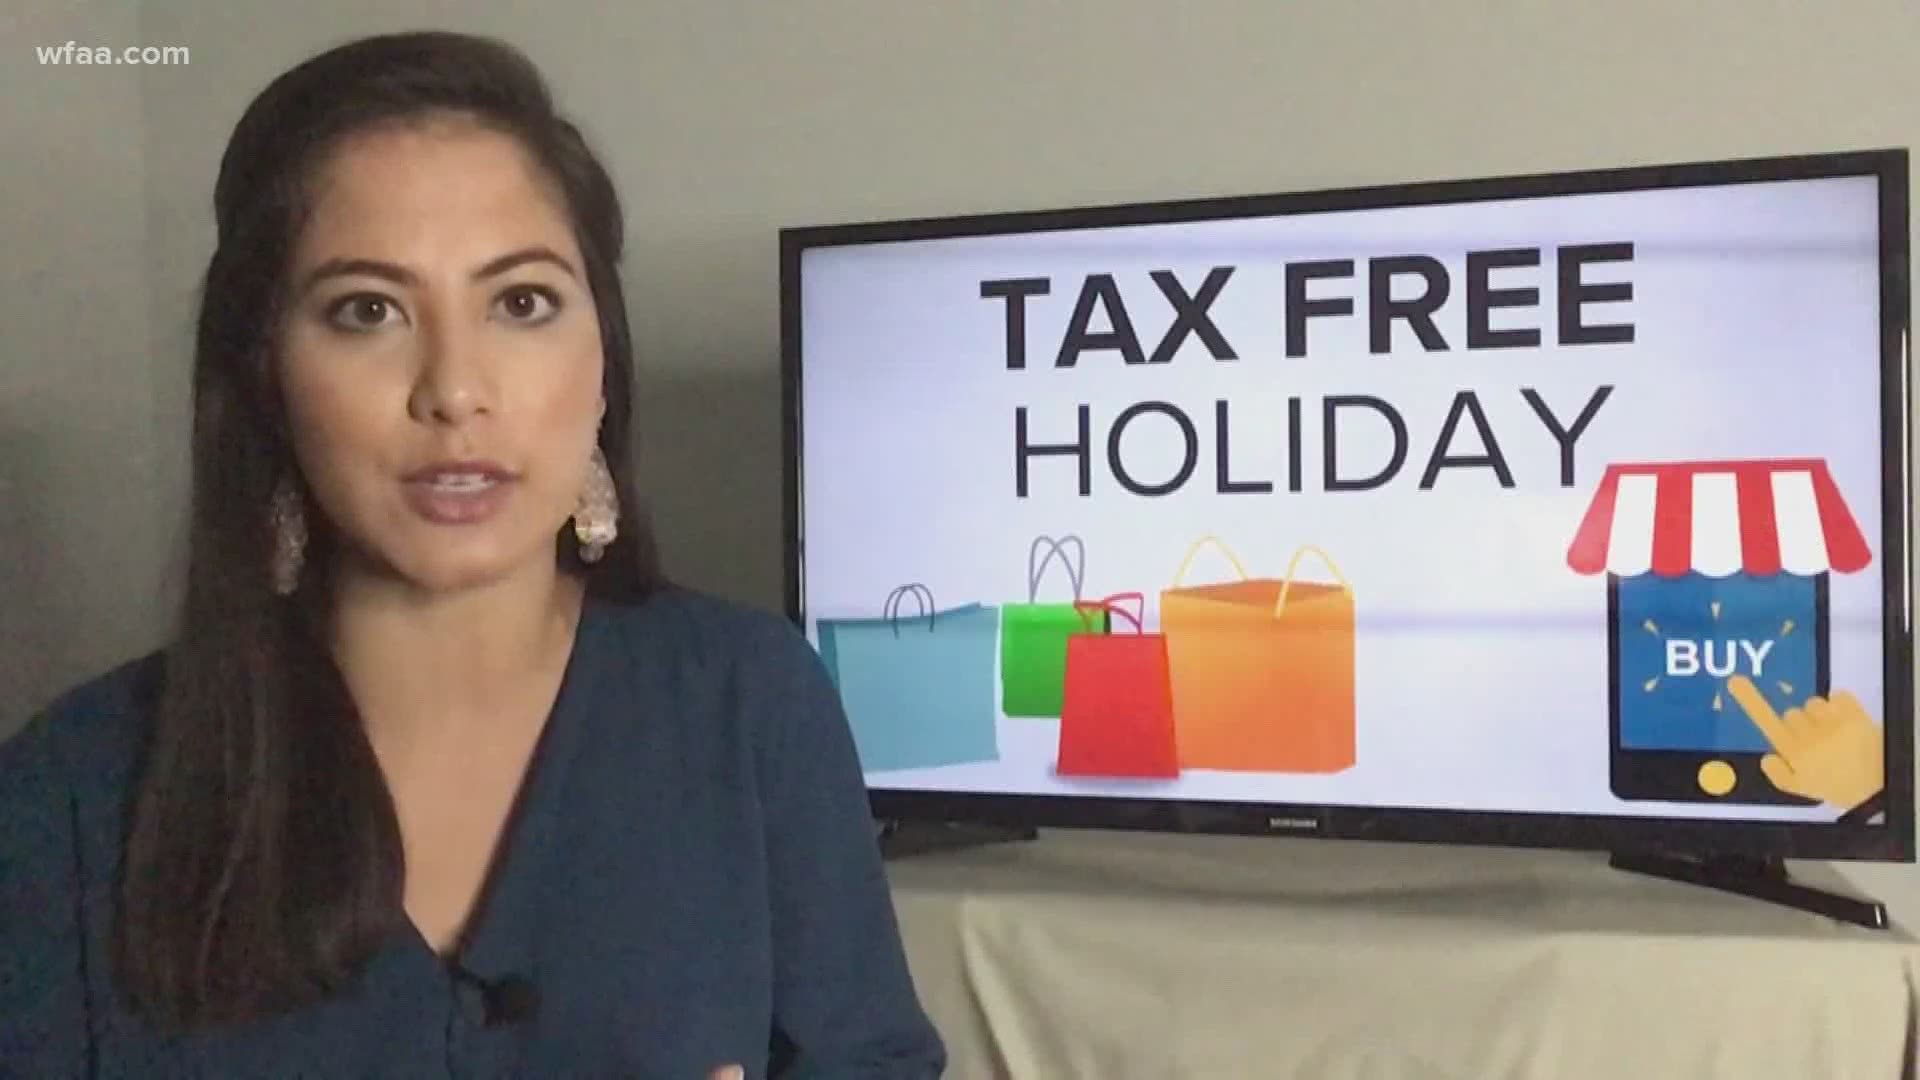 Taxfree holiday is this weekend in Texas. Here's what you need to know